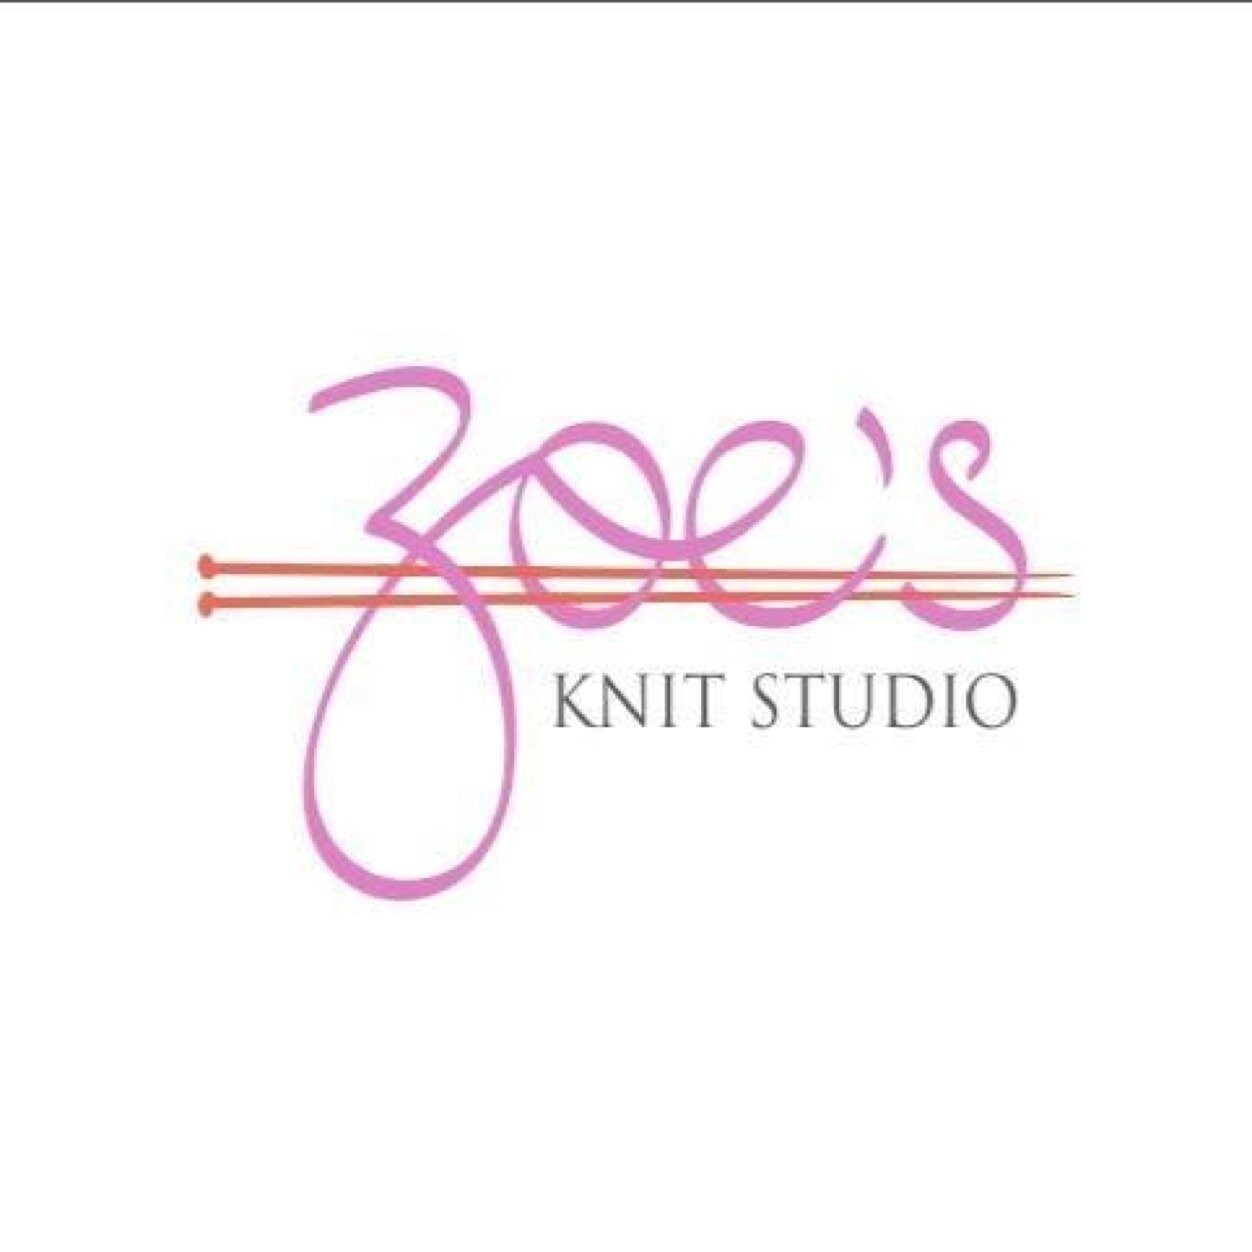 Zoe's knit studio is where people can gather, share and experience their creativity through the art of knitting. For more information visit our website.